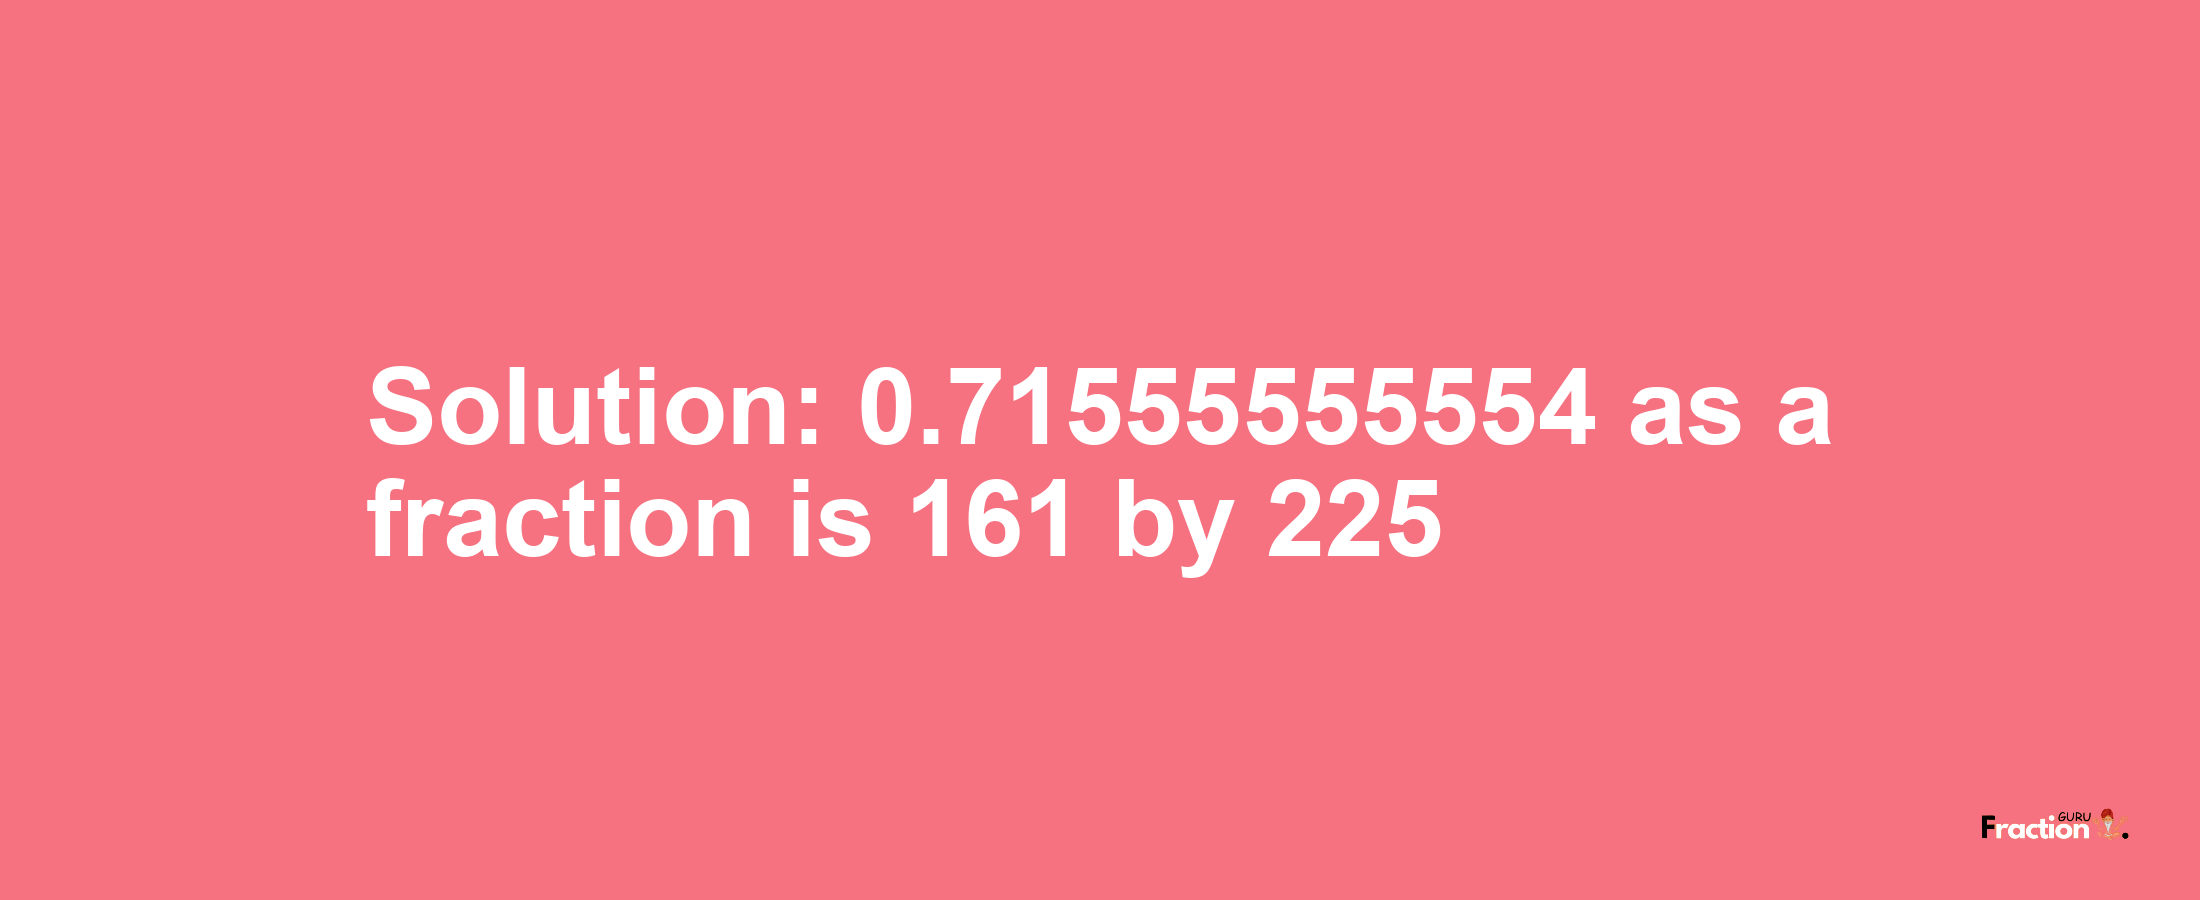 Solution:0.71555555554 as a fraction is 161/225